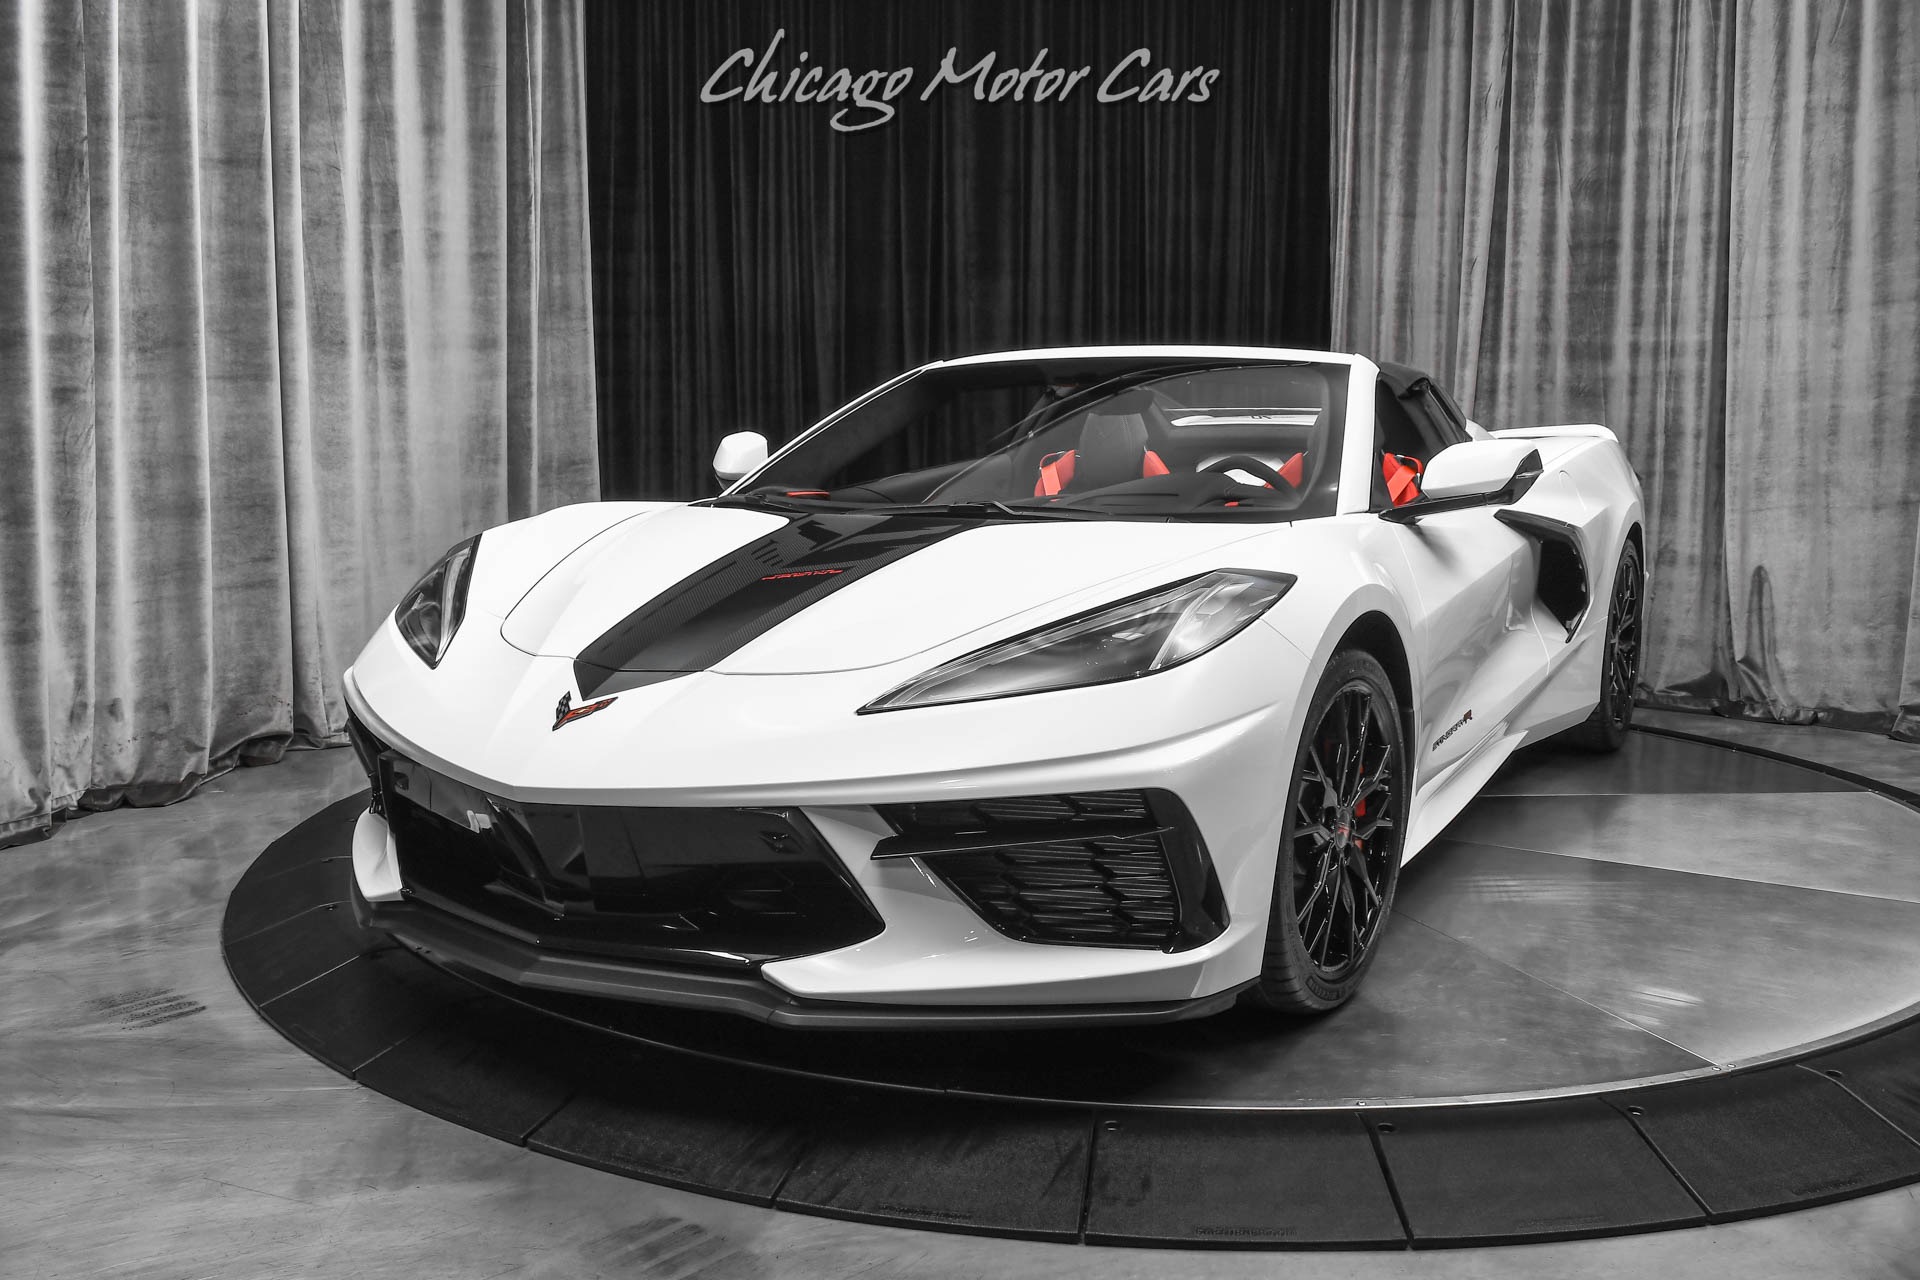 Used-2023-Chevrolet-Corvette-Stingray-3LT-Convertible-with-Z51-DELIVERY-Miles-Front-Lift-LOADED